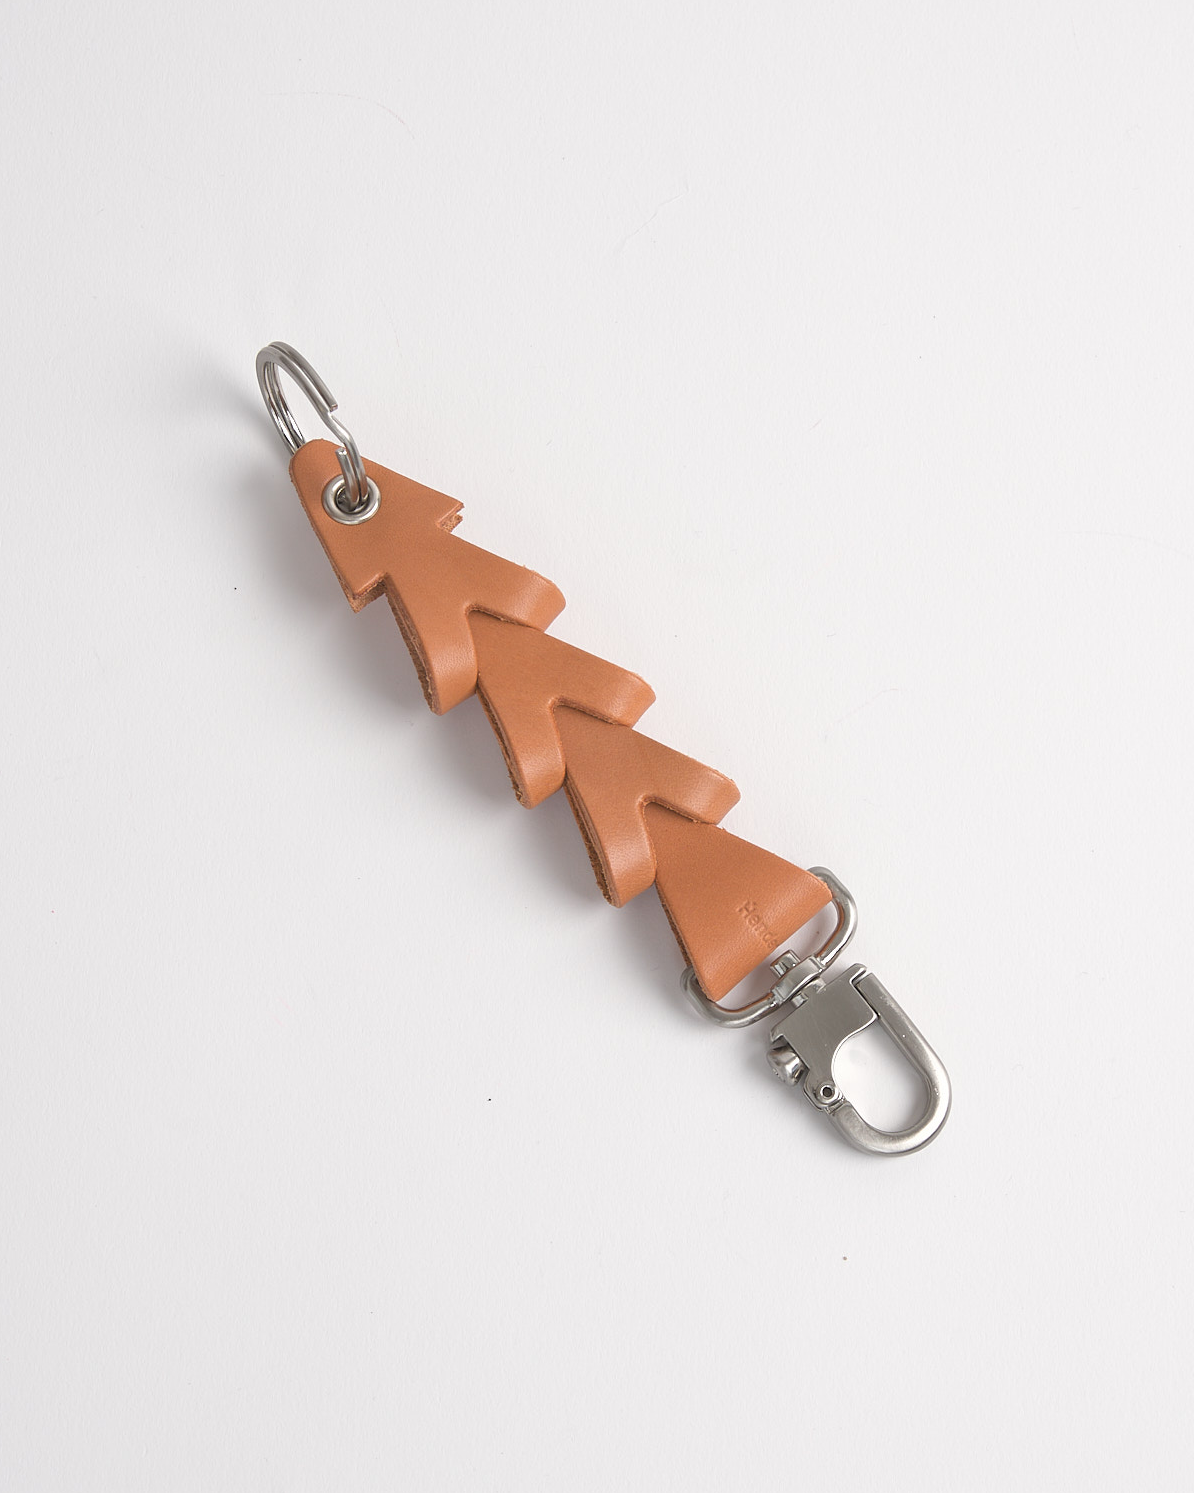 Construct Key Chain in Natural